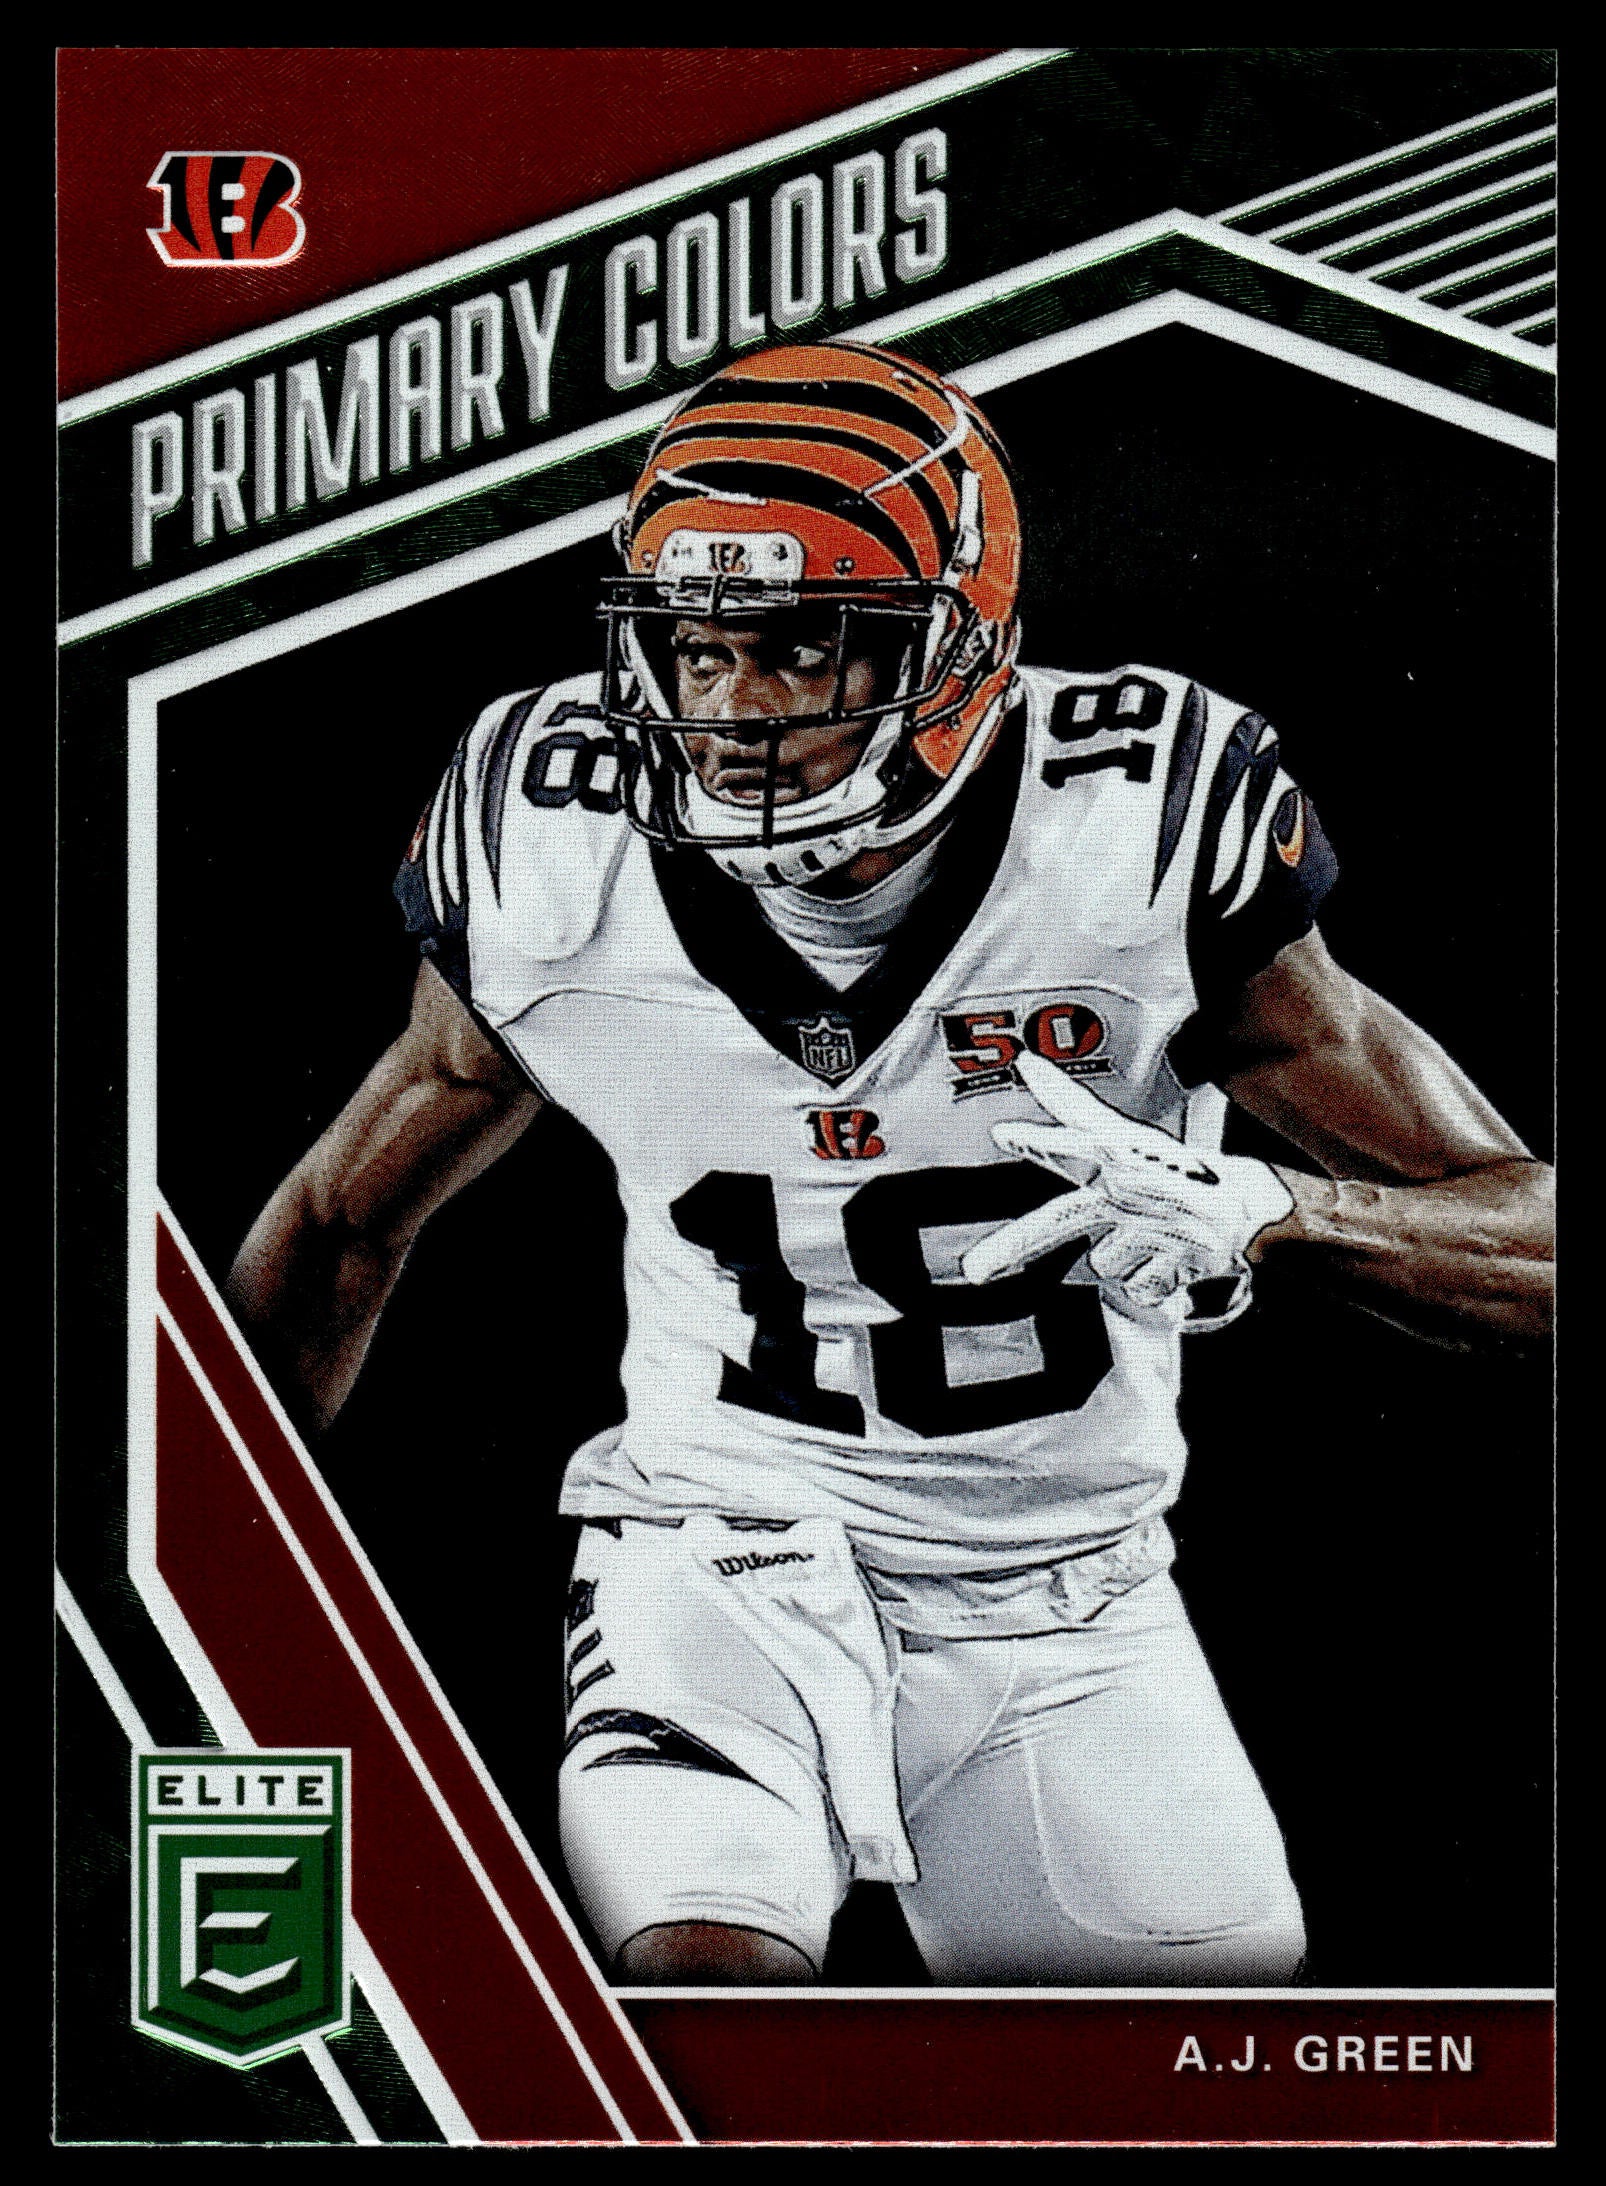 2019 Donruss Elite #PC-4 A.J. Green Primary Colors Green